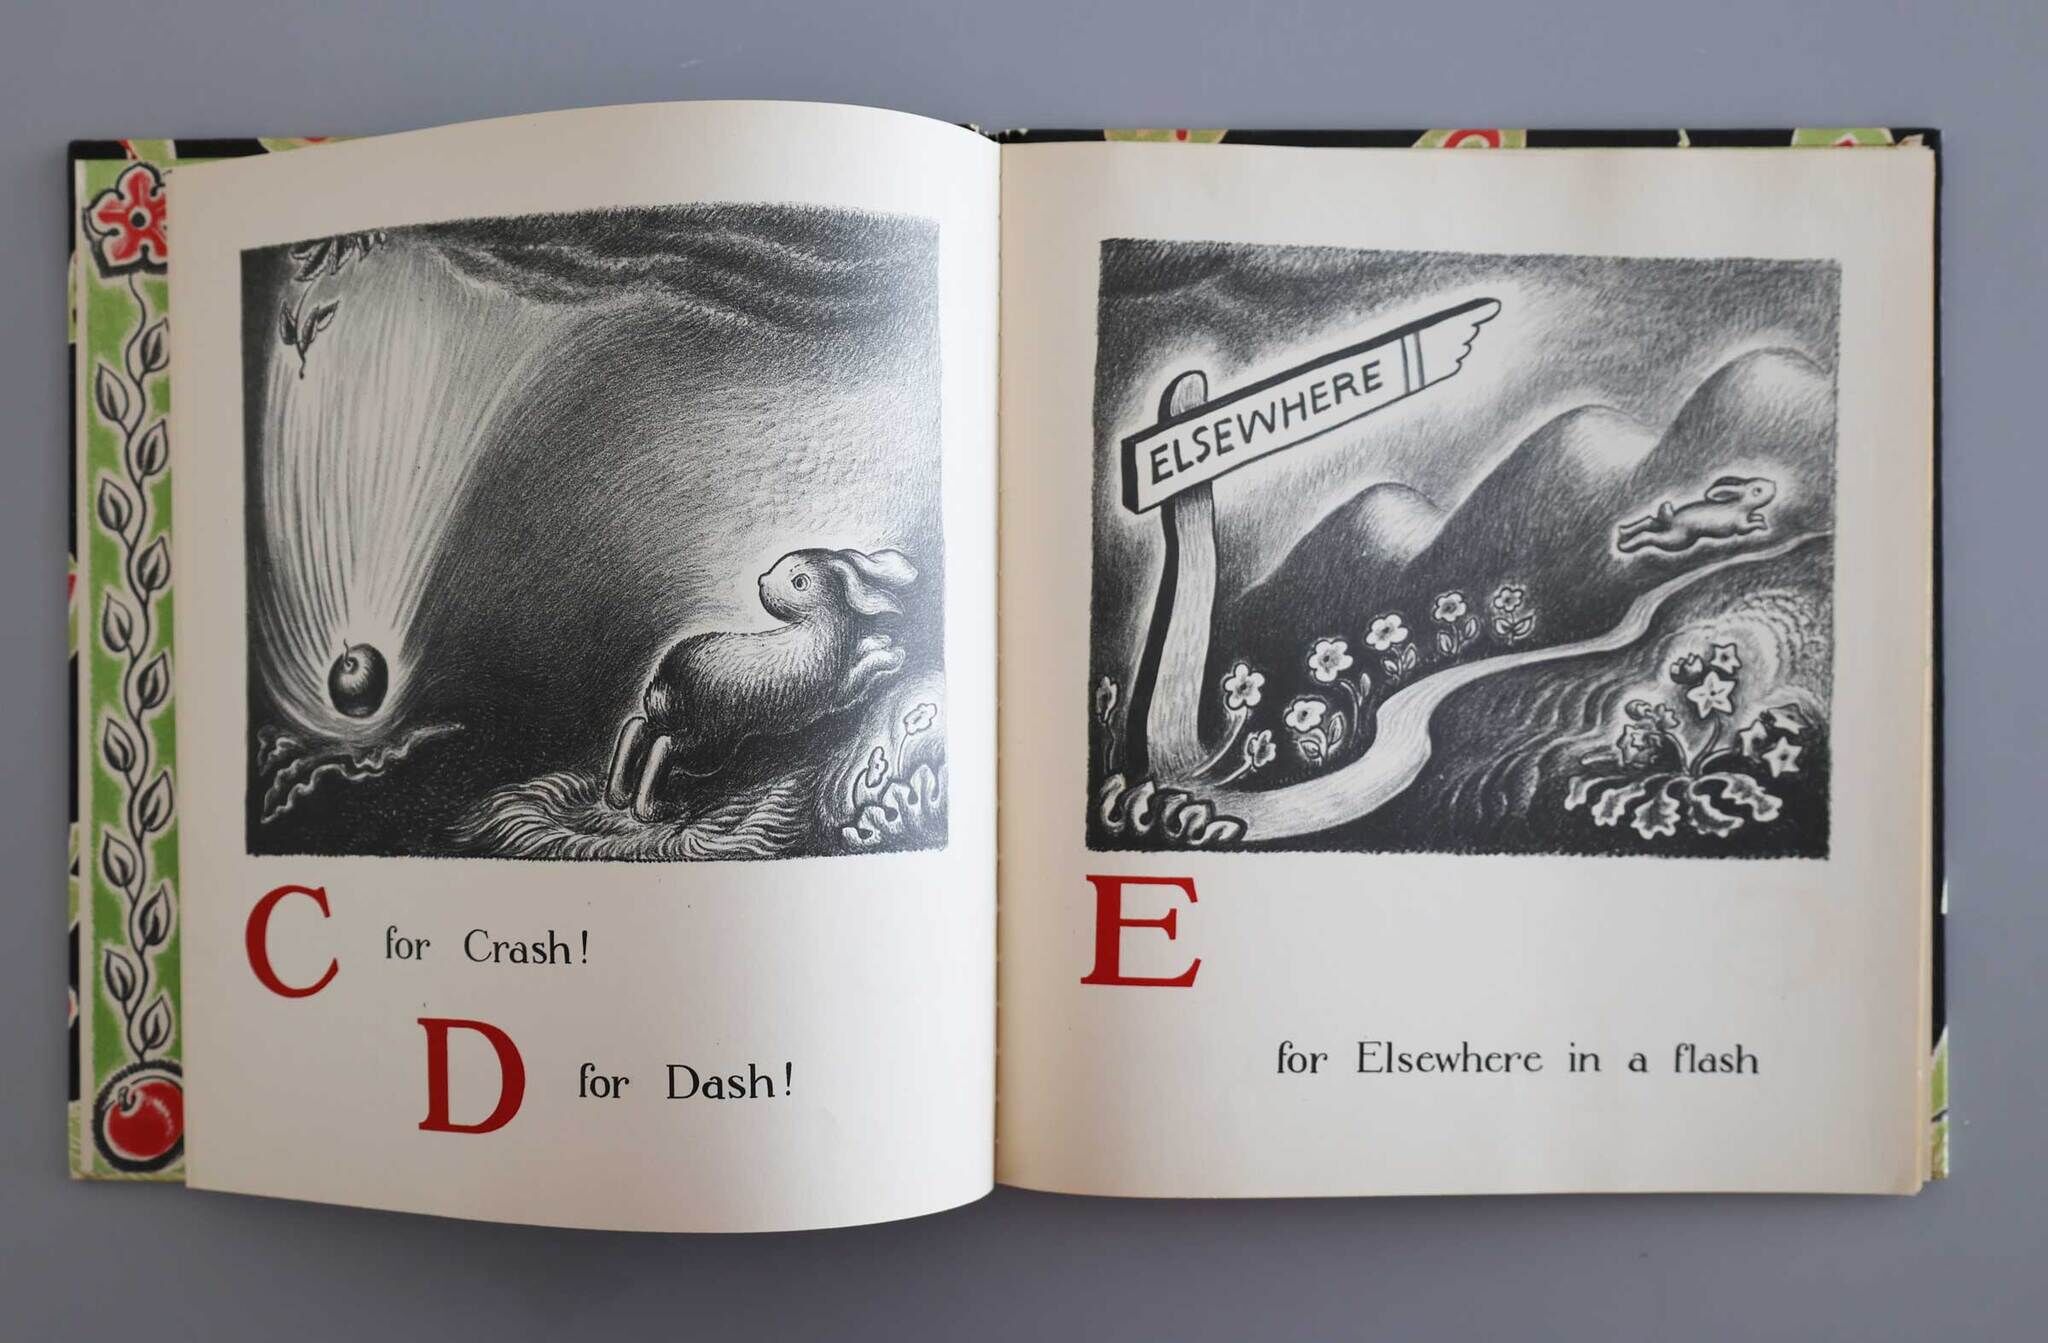 Open book with illustrated pages showing "C for Crash!" with a bowling ball and "D for Dash!" with a rabbit by a sign "ELSEWHERE."